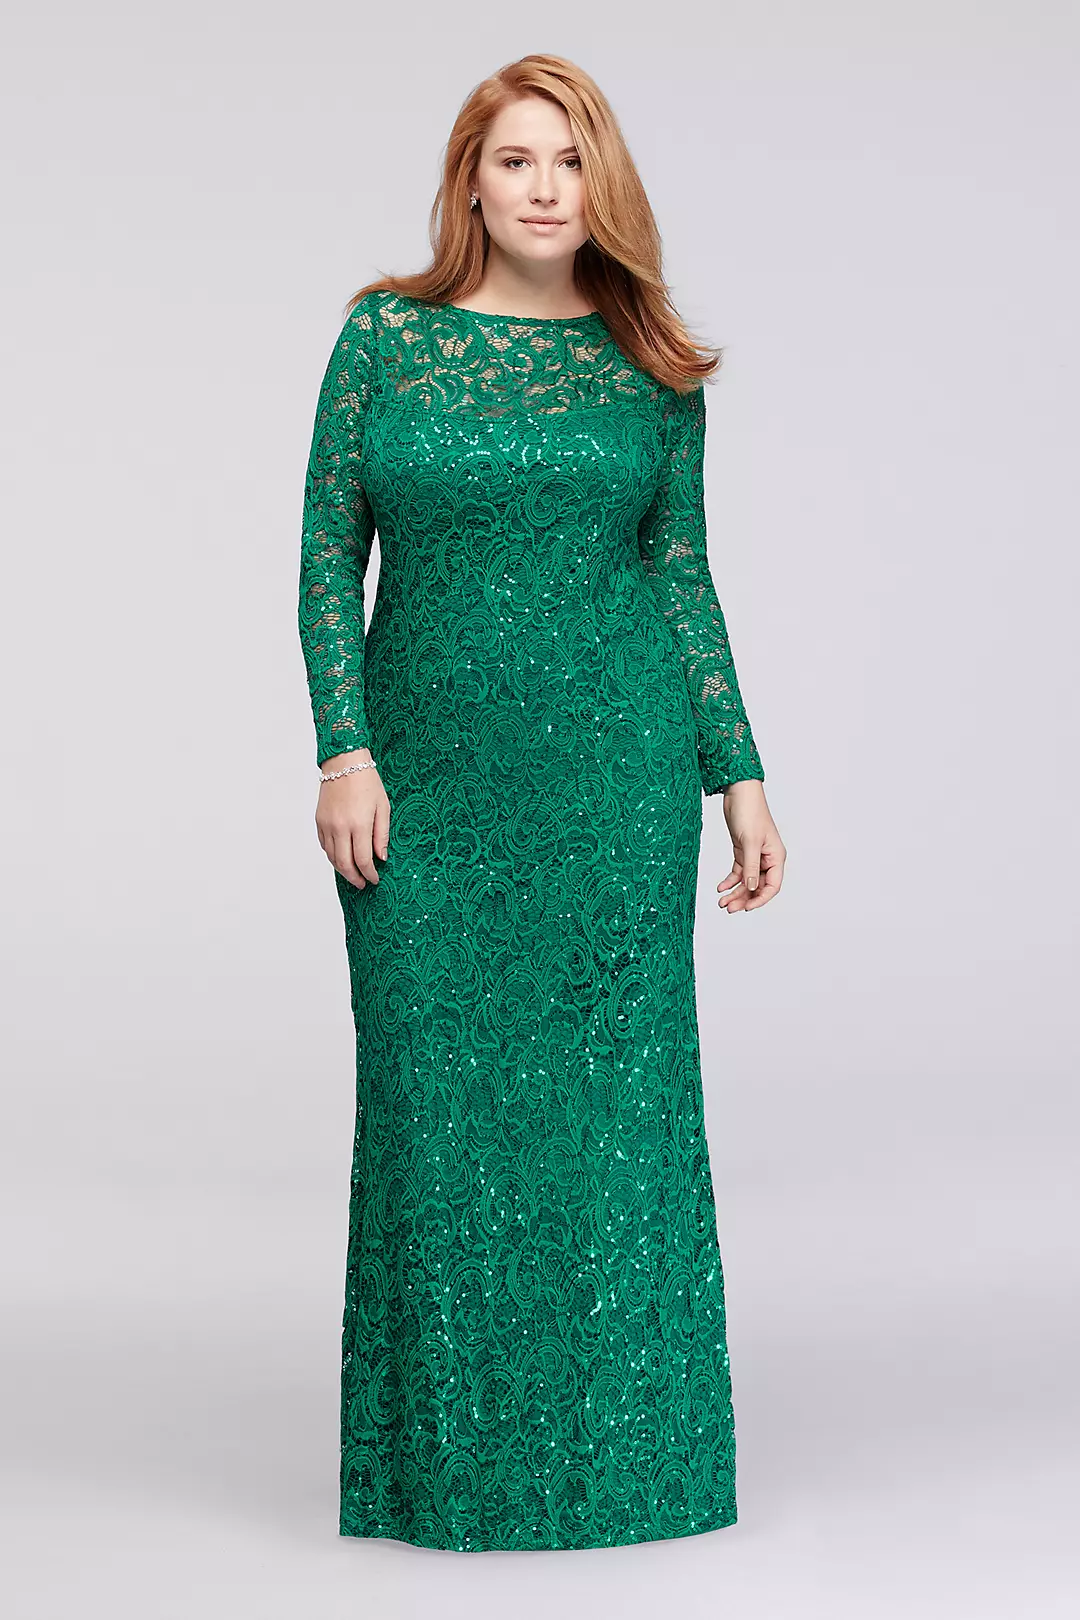 Long Sleeve Illusion Neckline Sequined Lace Dress  Image